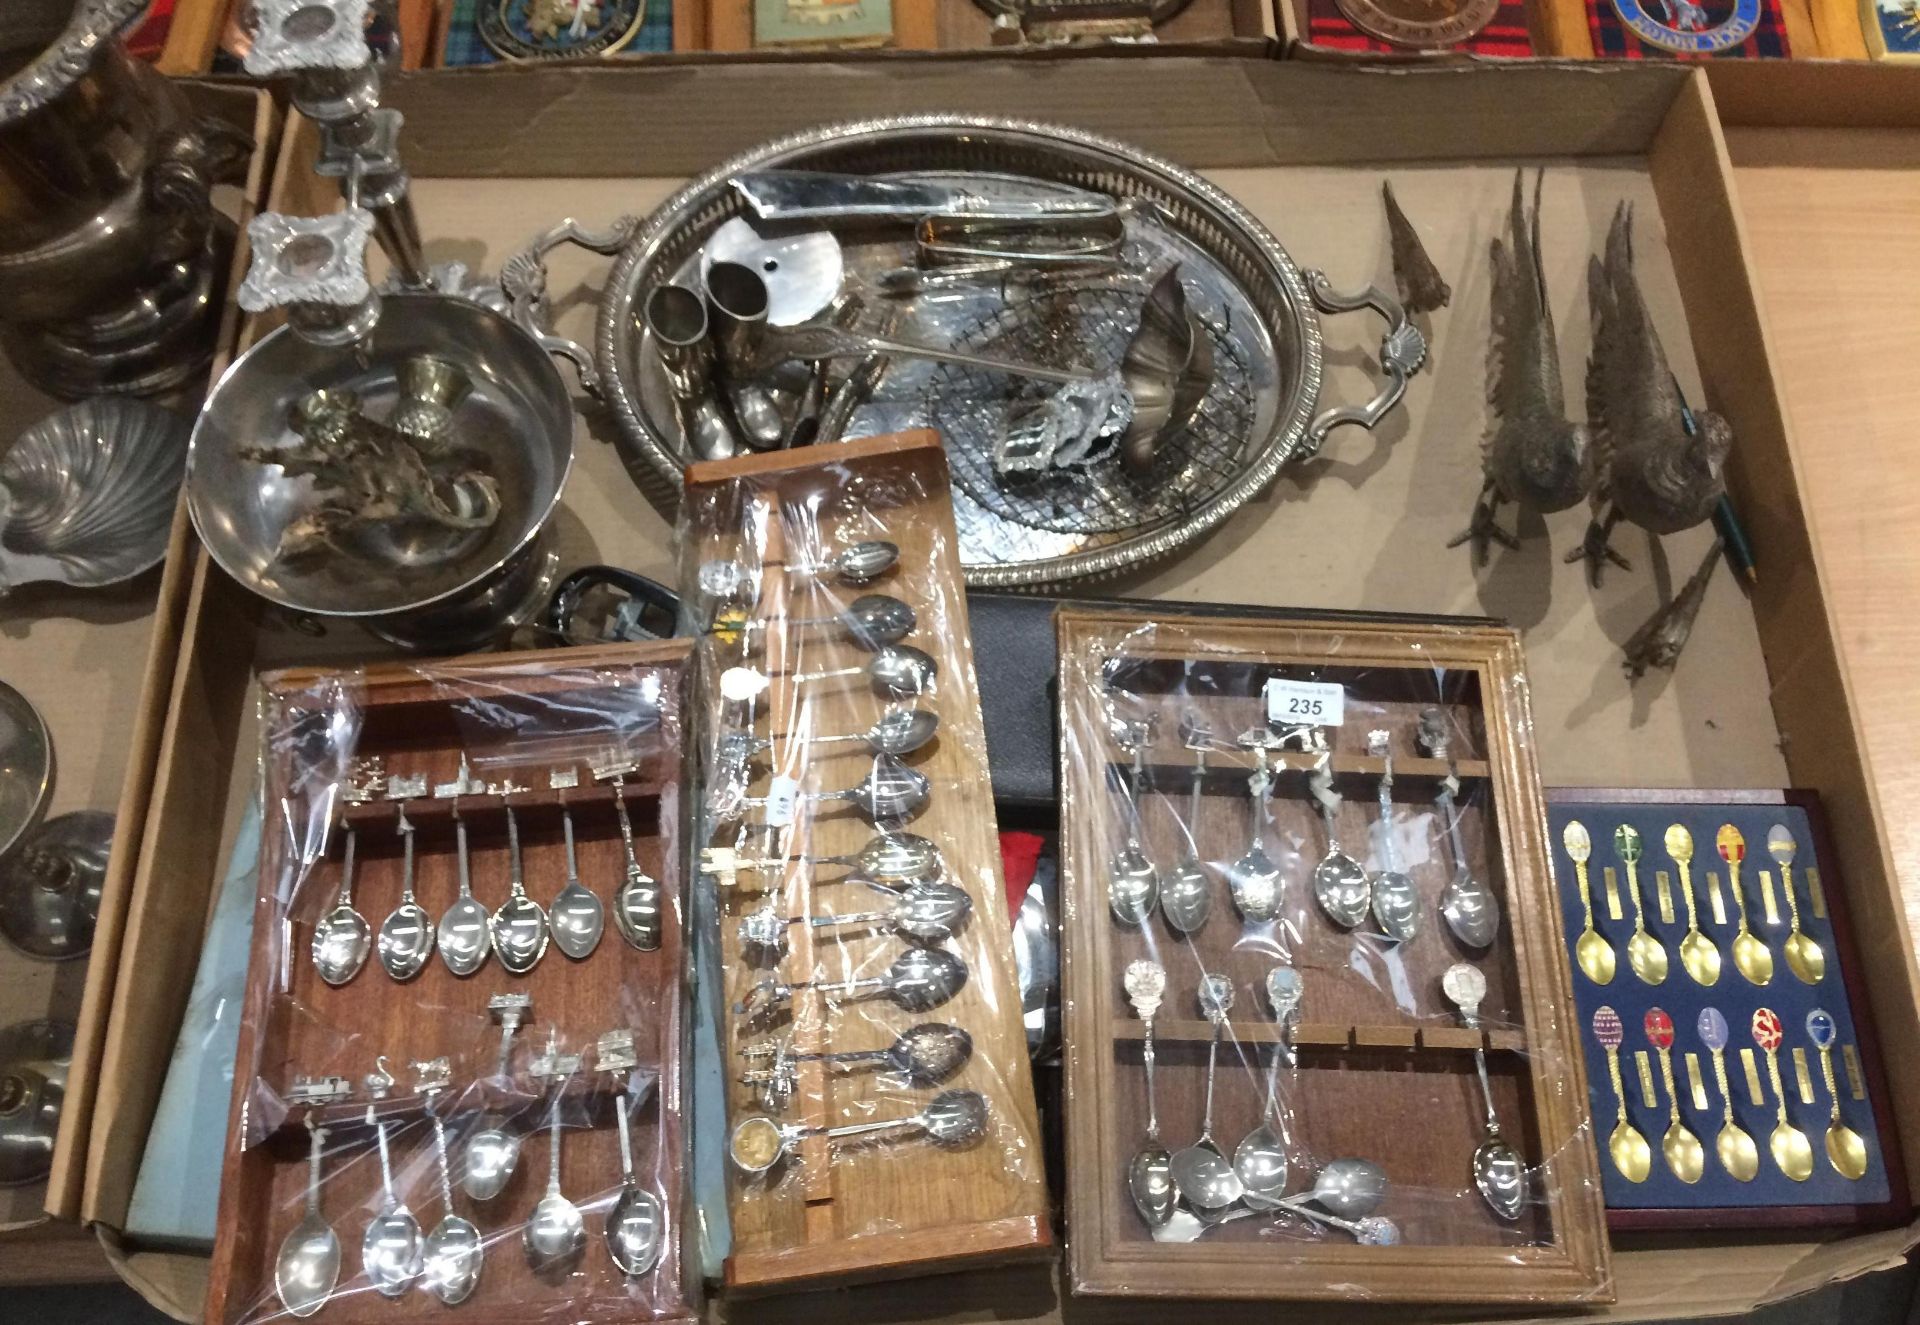 Contents to tray - metalware, two handled tray, candelabra, male, female and baby pheasants,